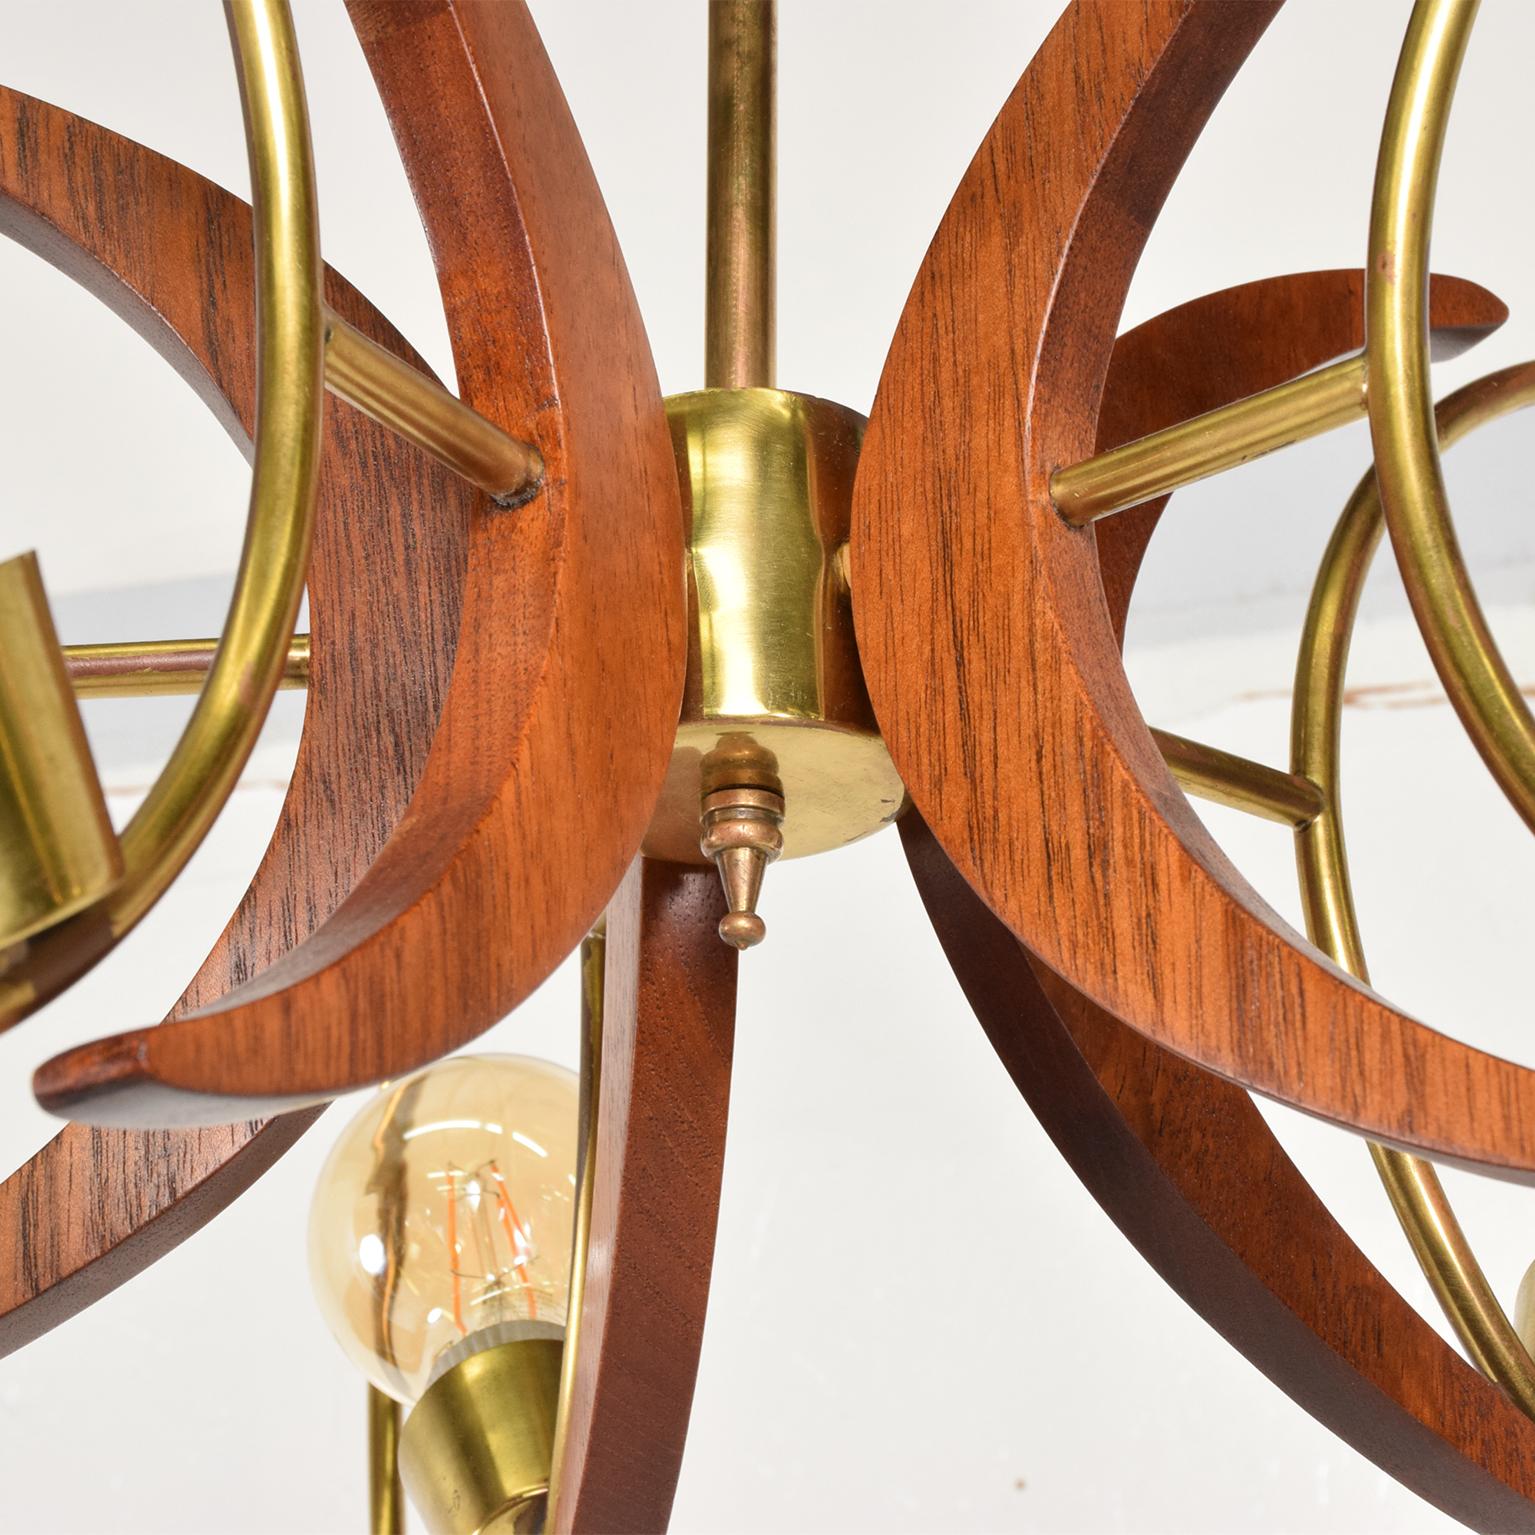 Mid-Century Modern Midcentury Modern Sculptural Chandelier 5 Ring Brass Mahogany Mexico City 1960s For Sale